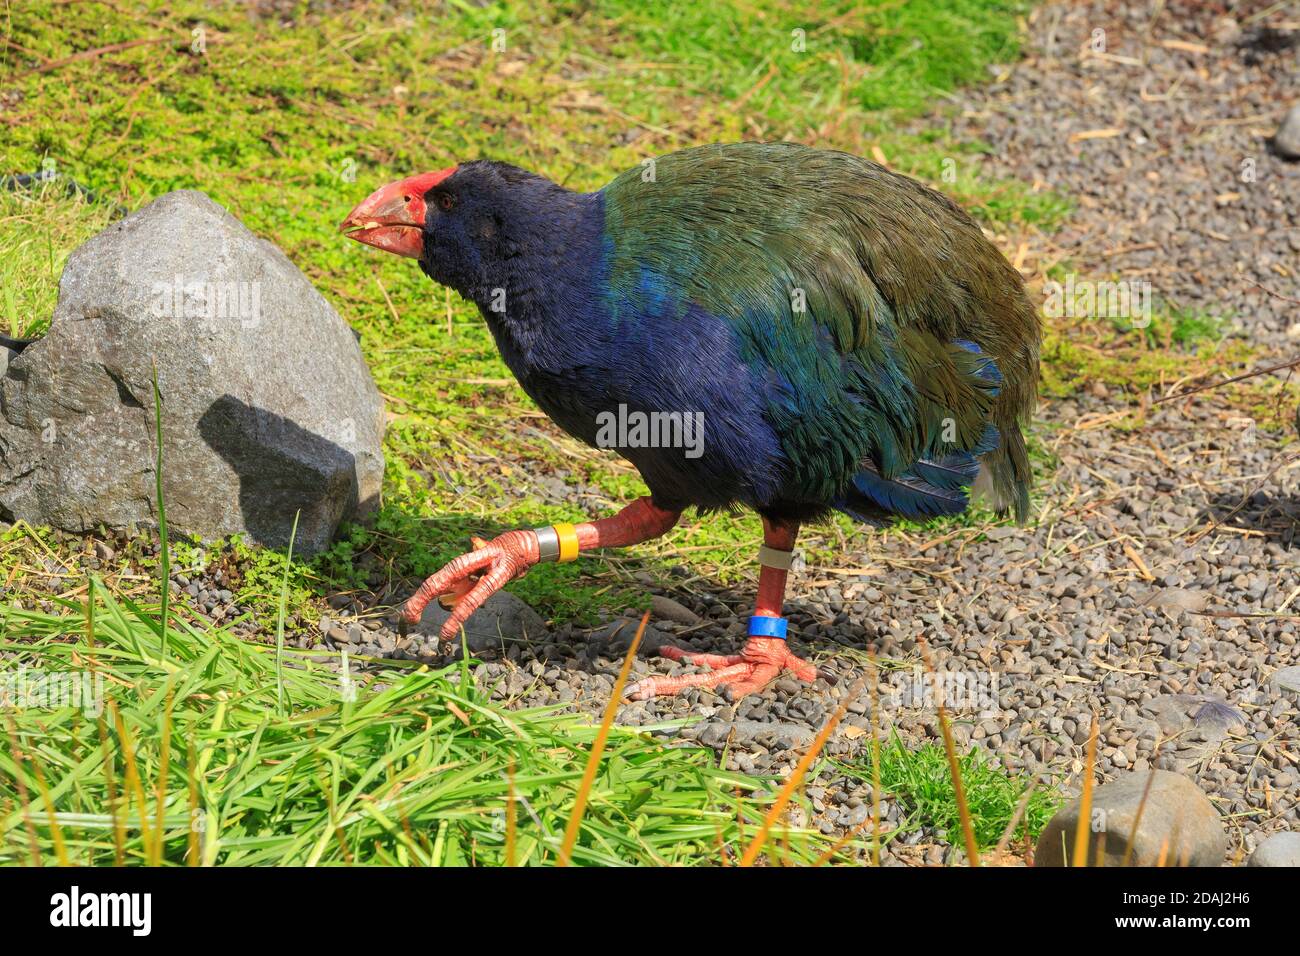 A takahe, an endangered flightless bird found only in New Zealand with beautiful blue and green plumage Stock Photo